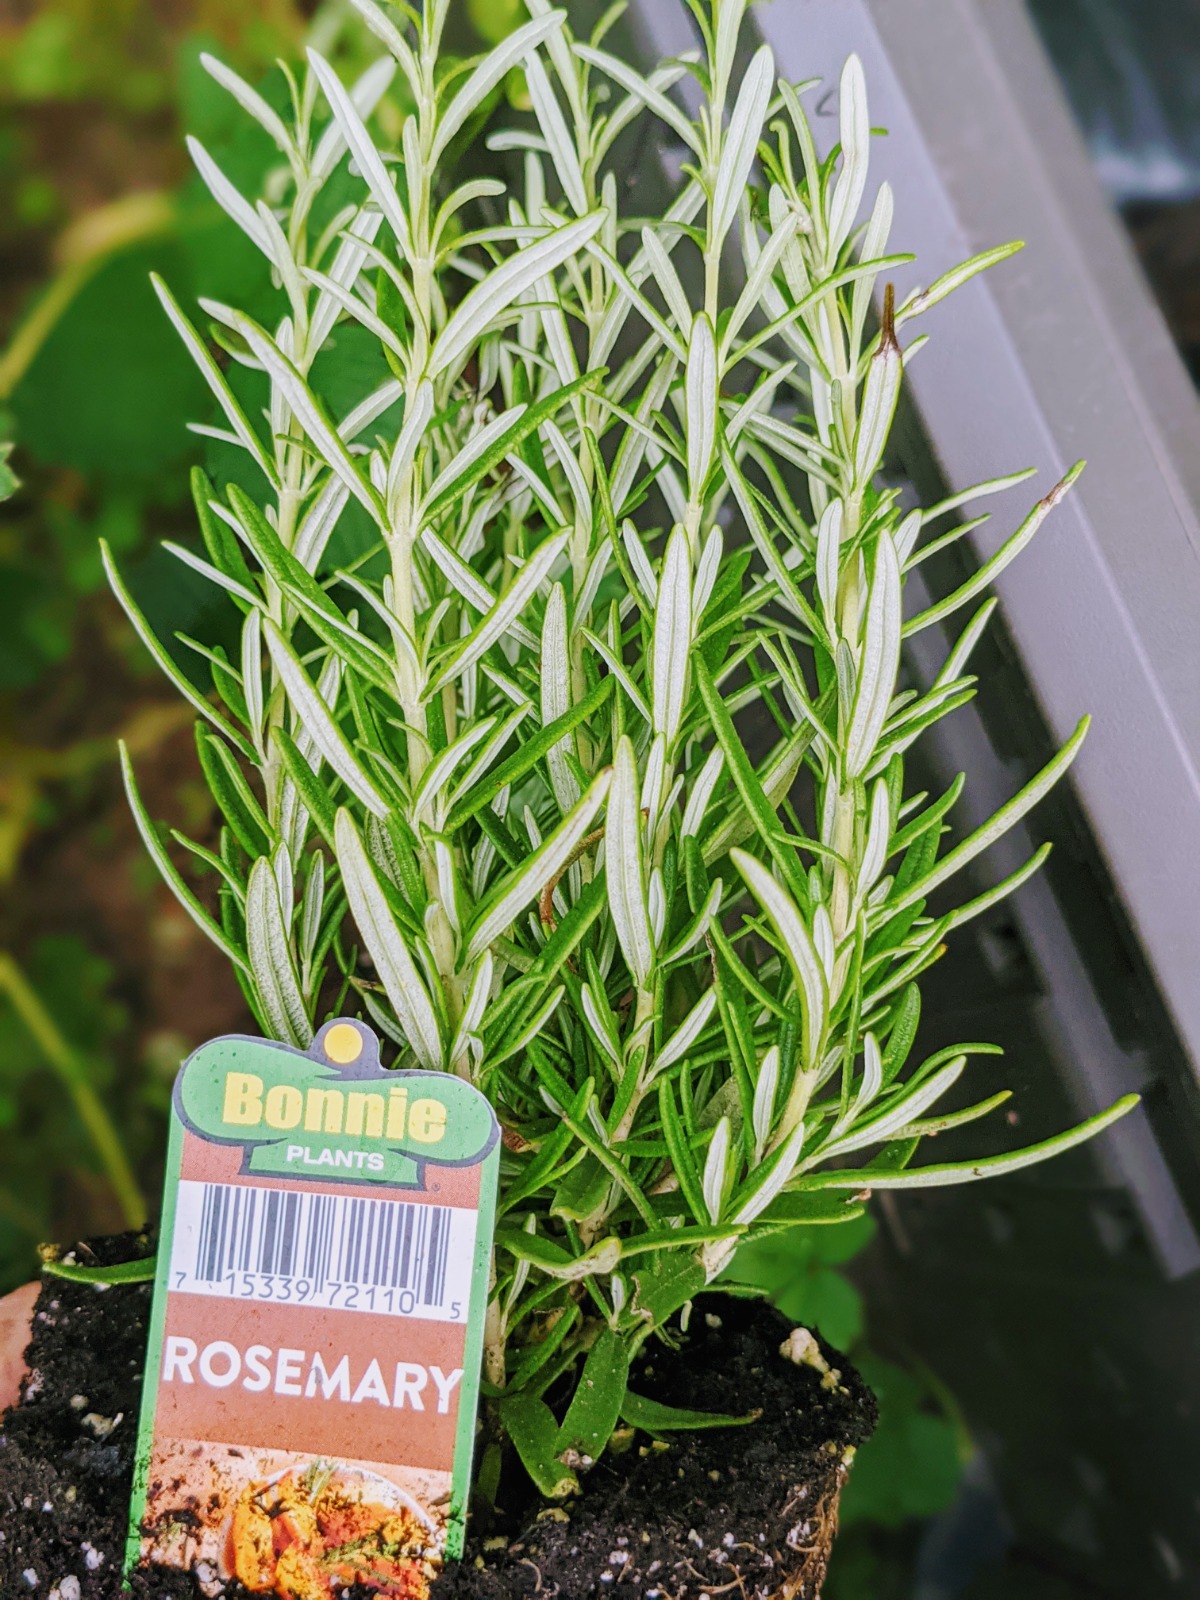 Rosemary plant ready for the garden